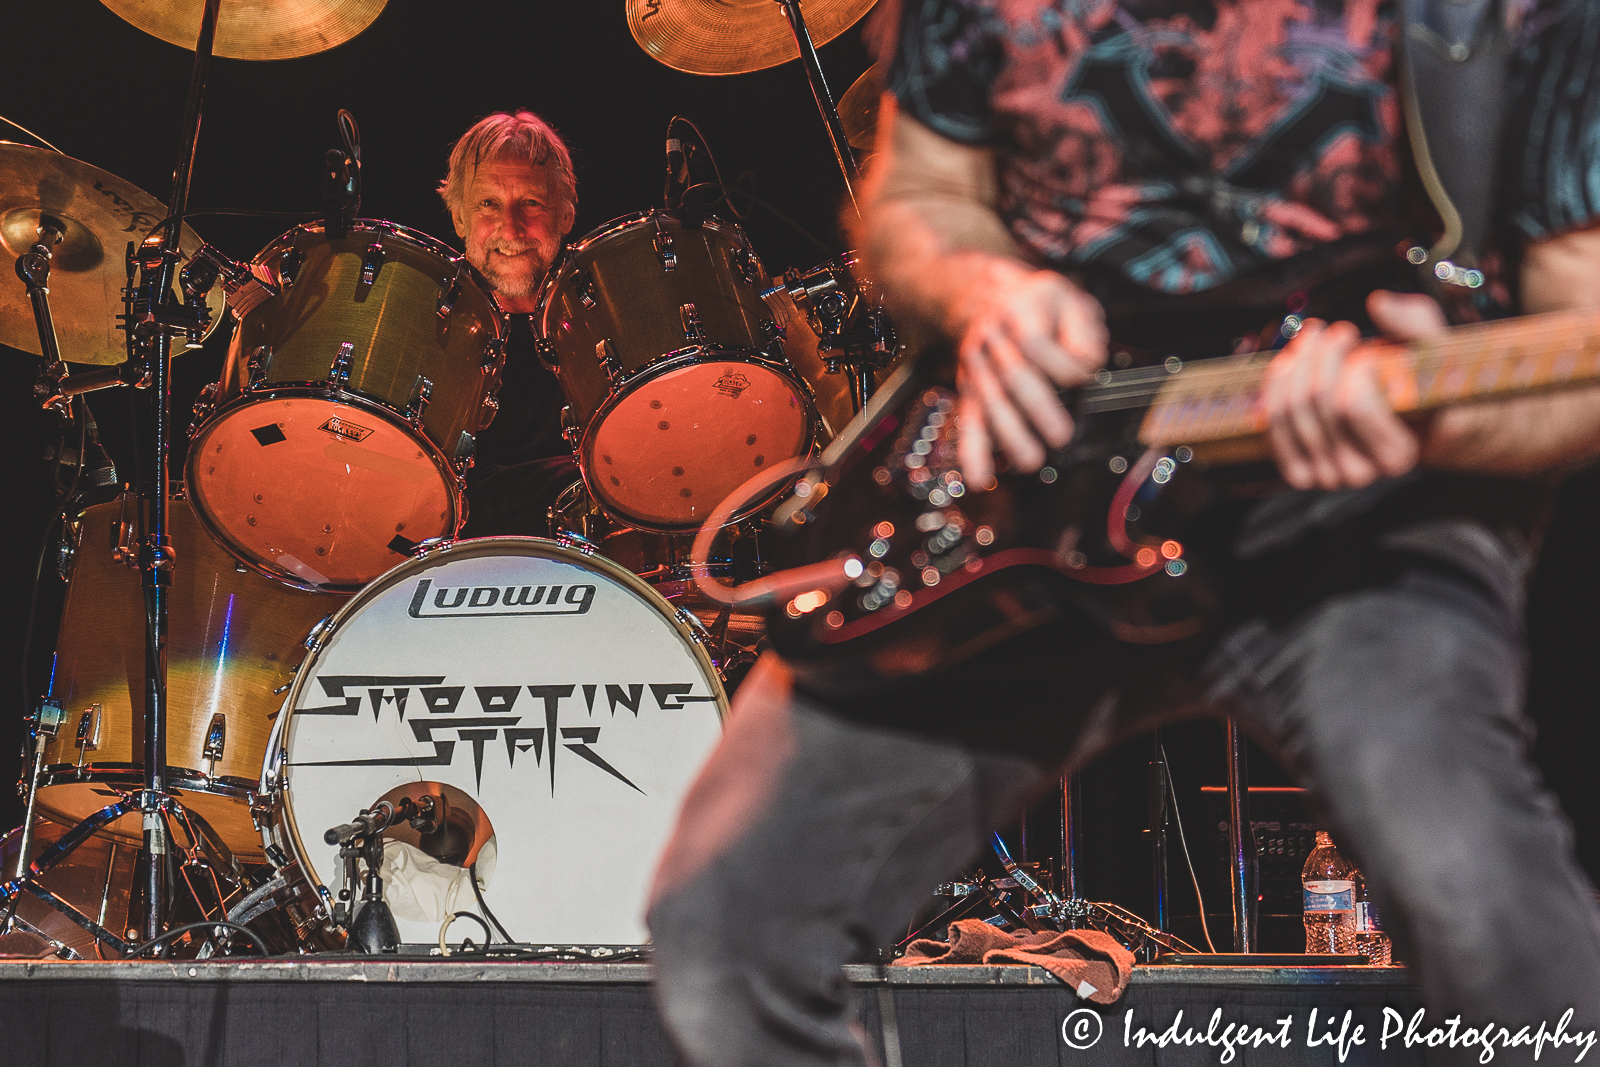 Founding member and drummer Steve Thomas of Shooting Star live in concert with guitarist Chet Galloway at Ameristar Casino in Kansas City, MO on April 9, 2022.